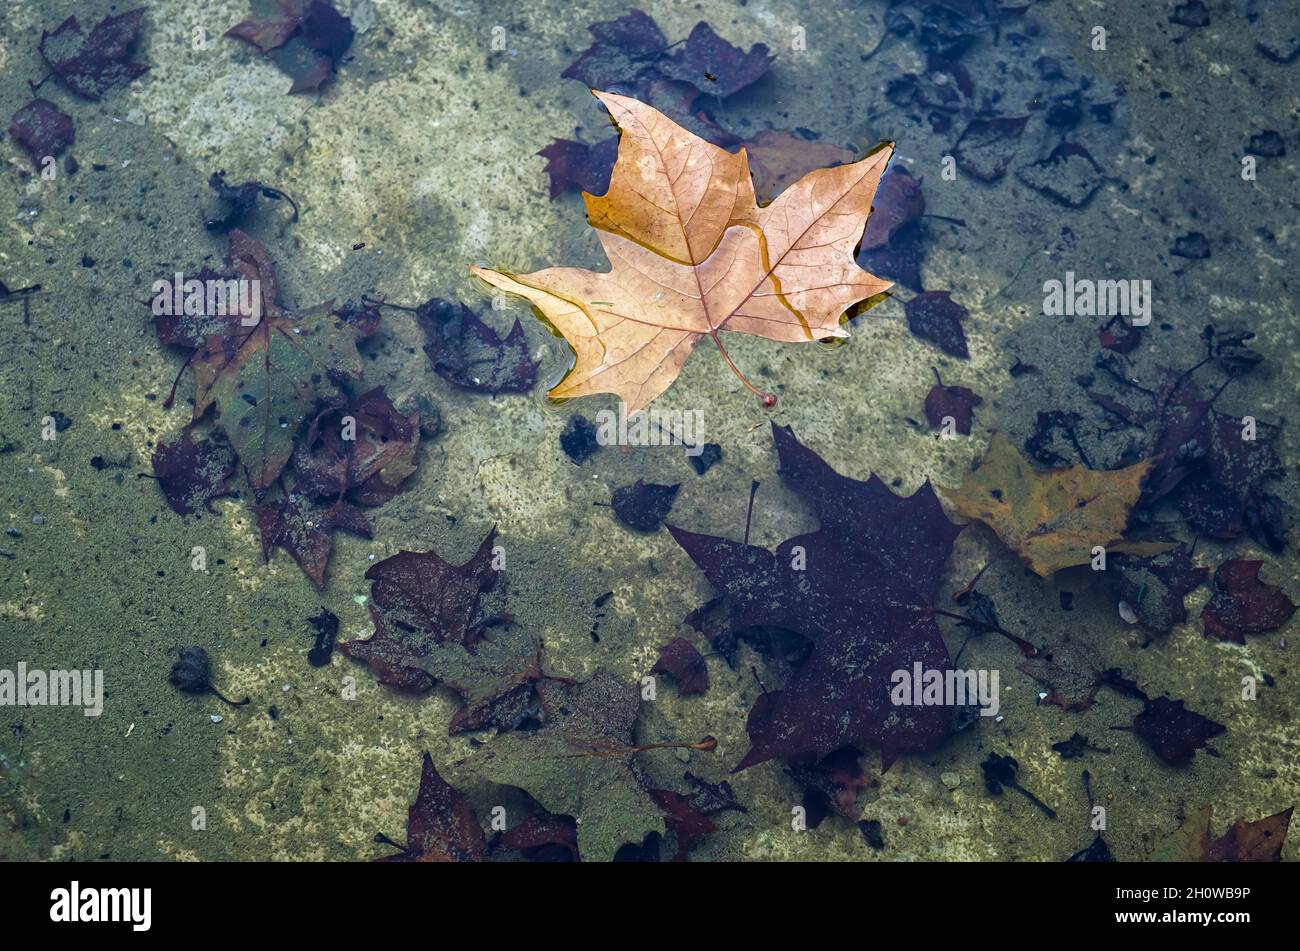 a dry leaf fallen from a tree floating on a pond of water, in the bottom decomposed leaves on a background of green algae, autumn texture, leaf of Pla Stock Photo